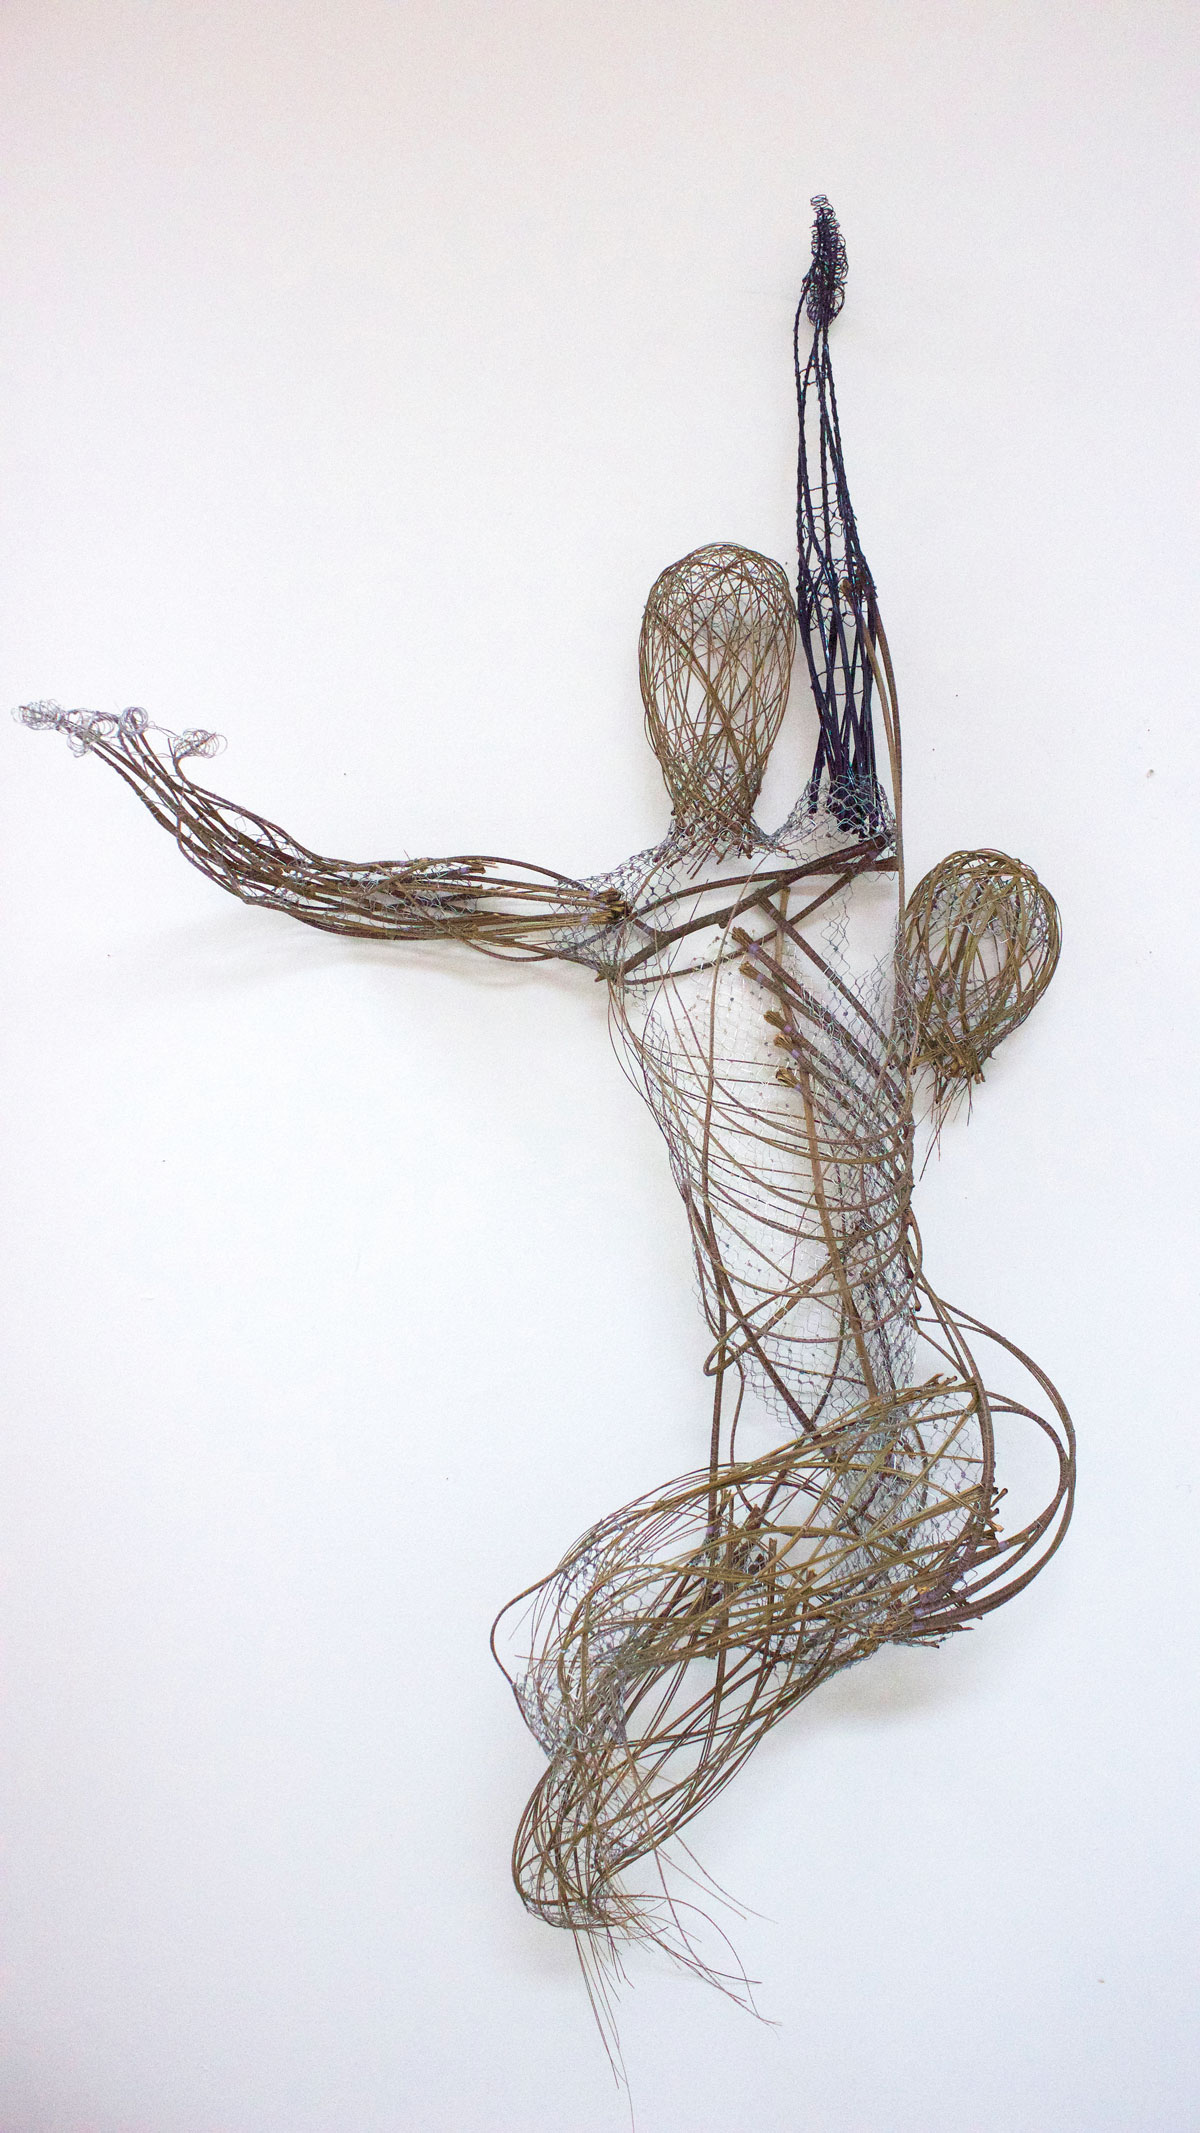 palm spines weaved together into a human-esque figure